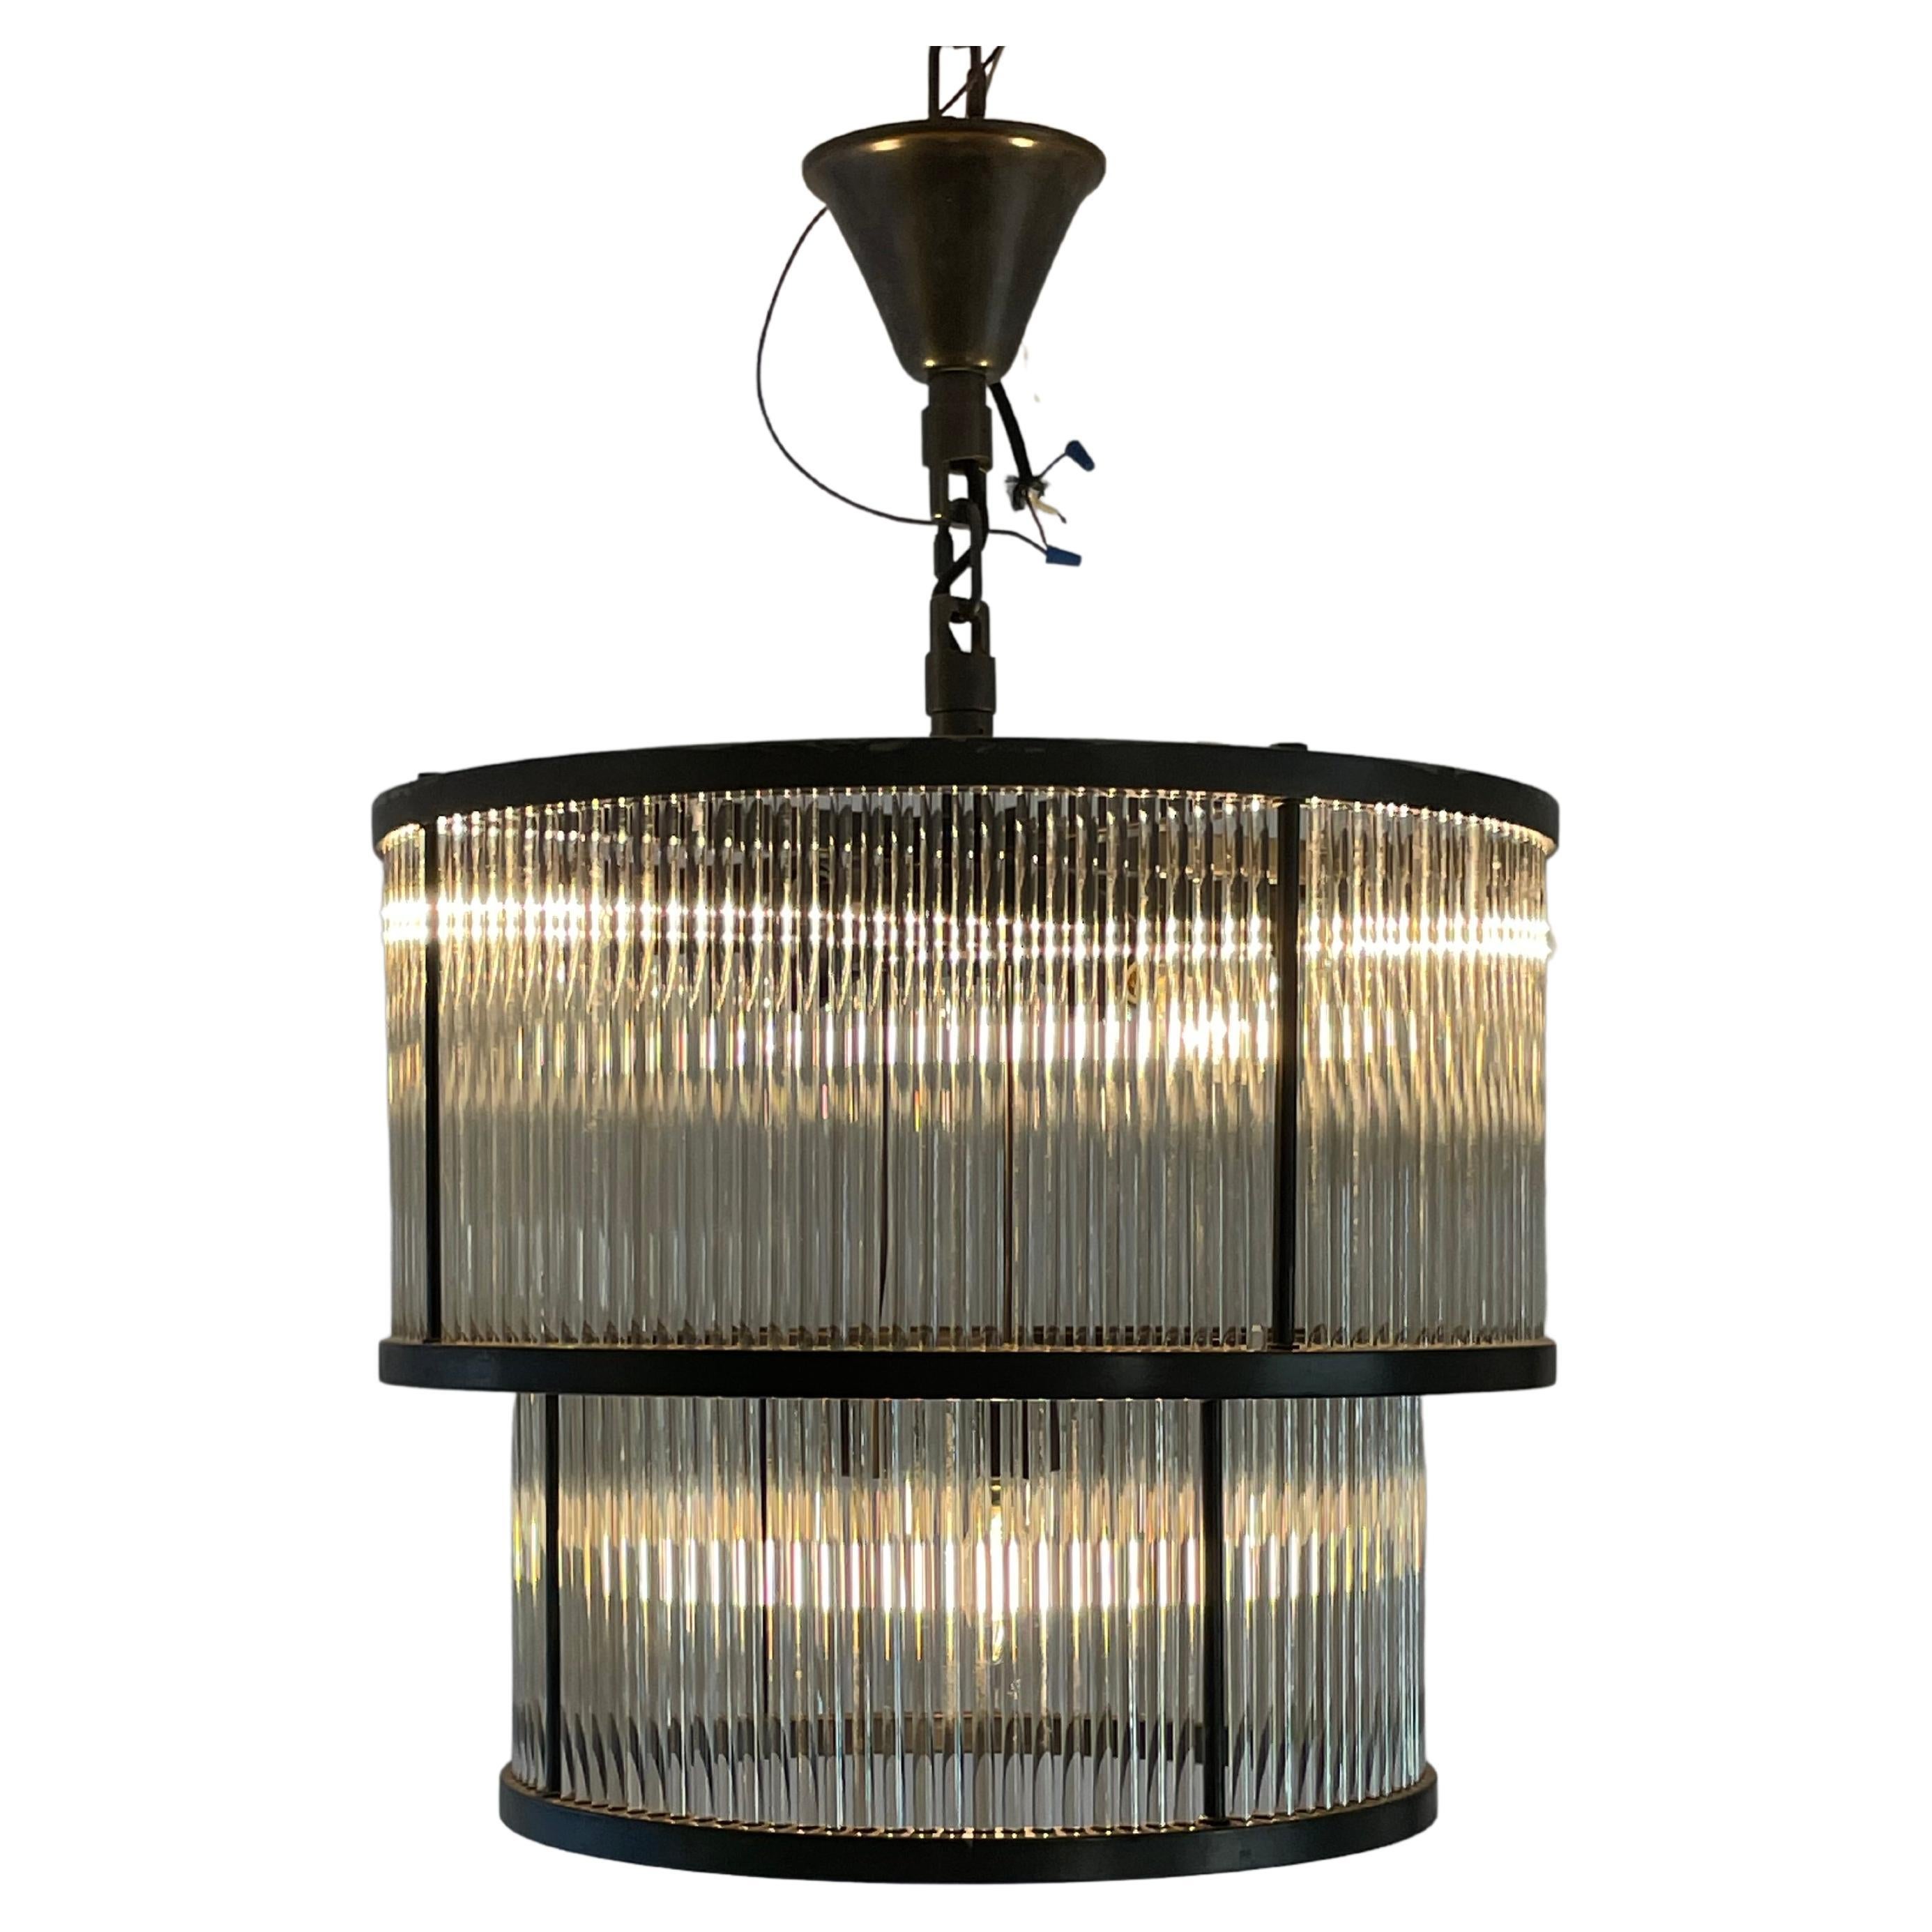 Dutch Cylindrical Suspension Glass Ceiling Lamp For Sale